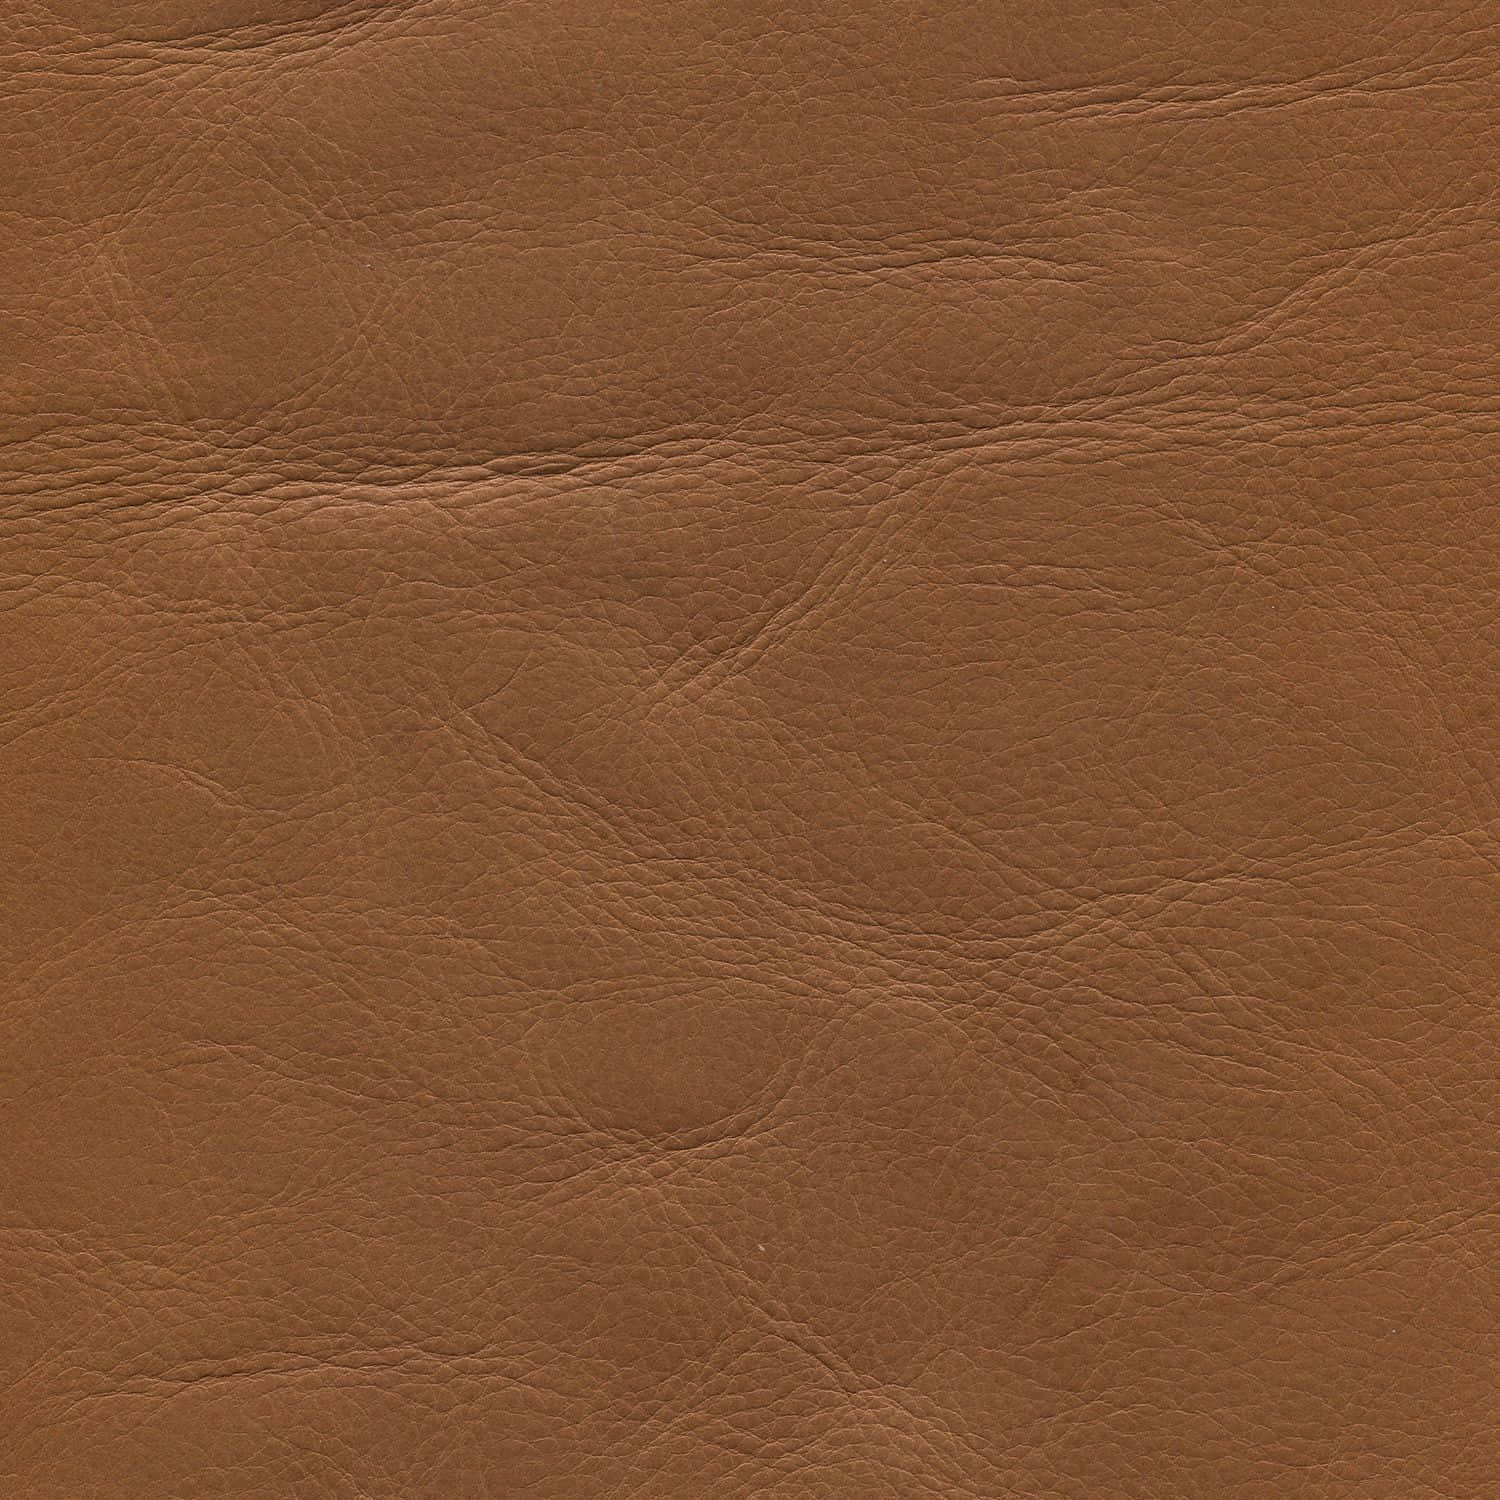 Animal Skin Leather Texture Picture